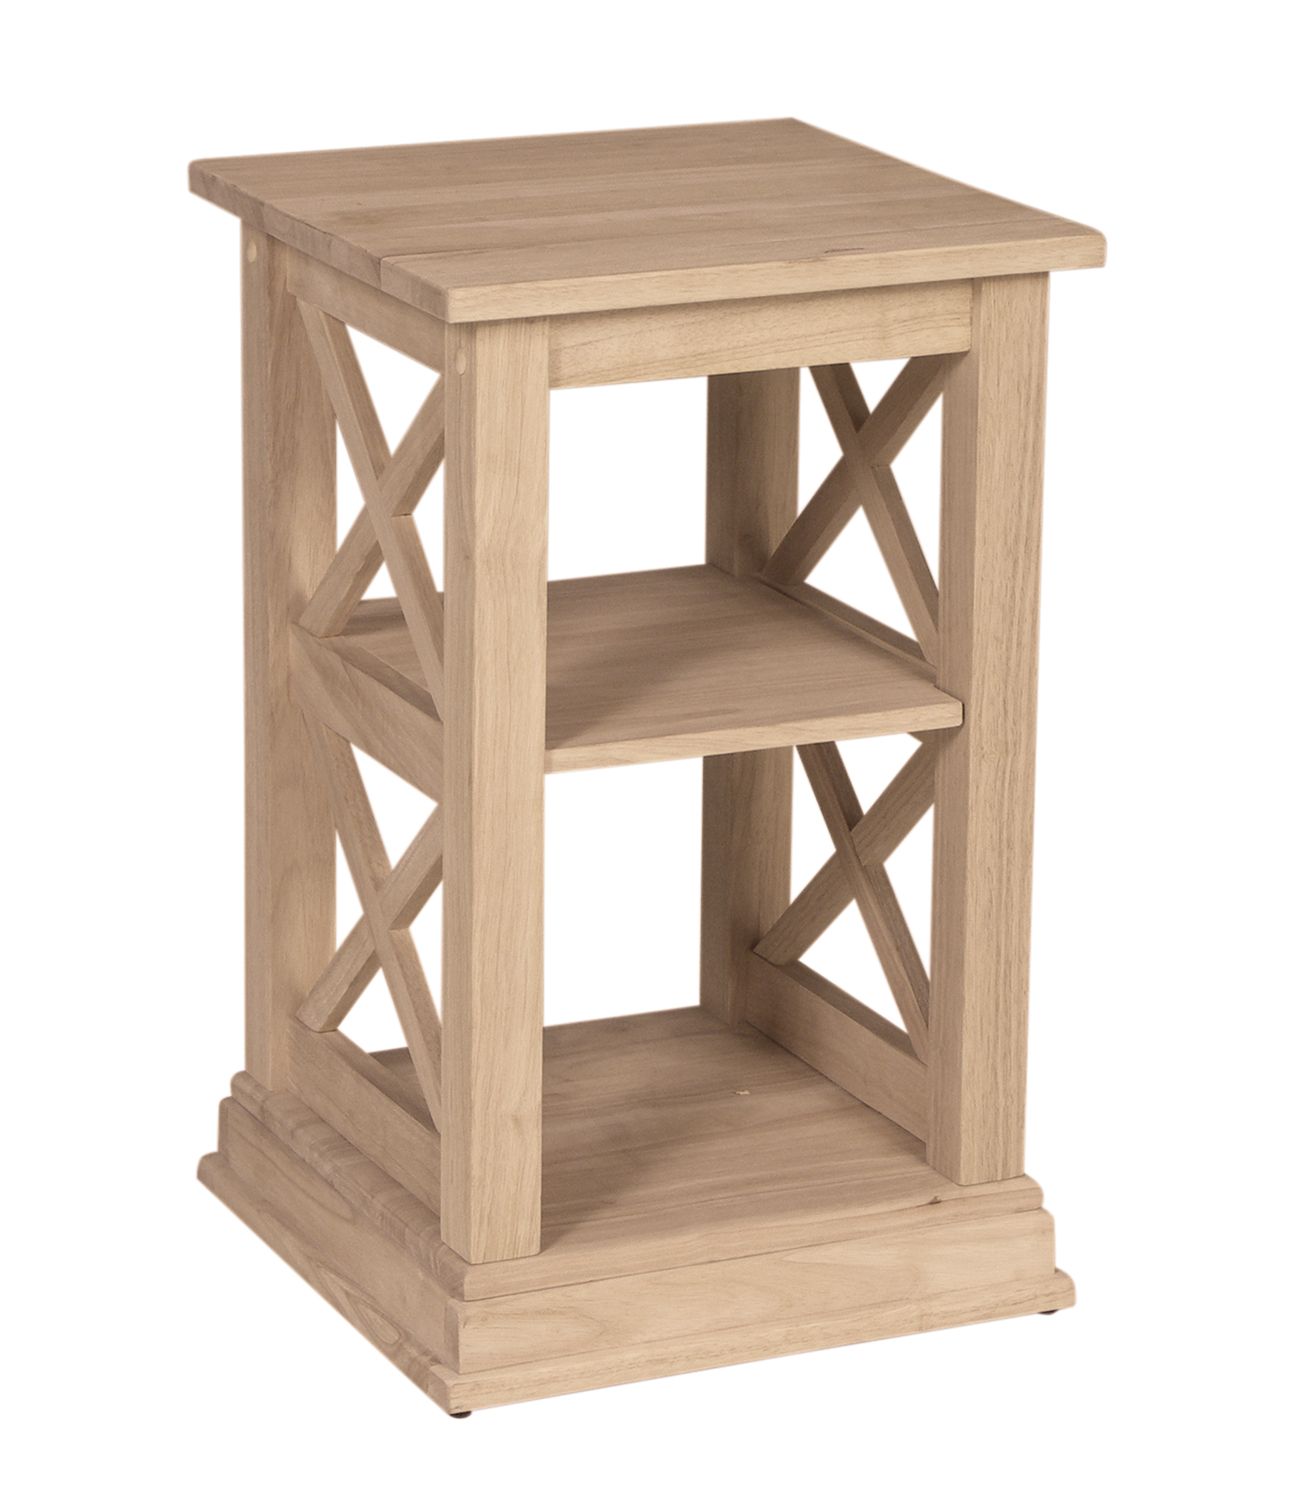 solid wood accent table update your home with natural unfinished furnishings naturalwoodfurnishings solidwoodfurniture diy customfurniture five below valley city furniture